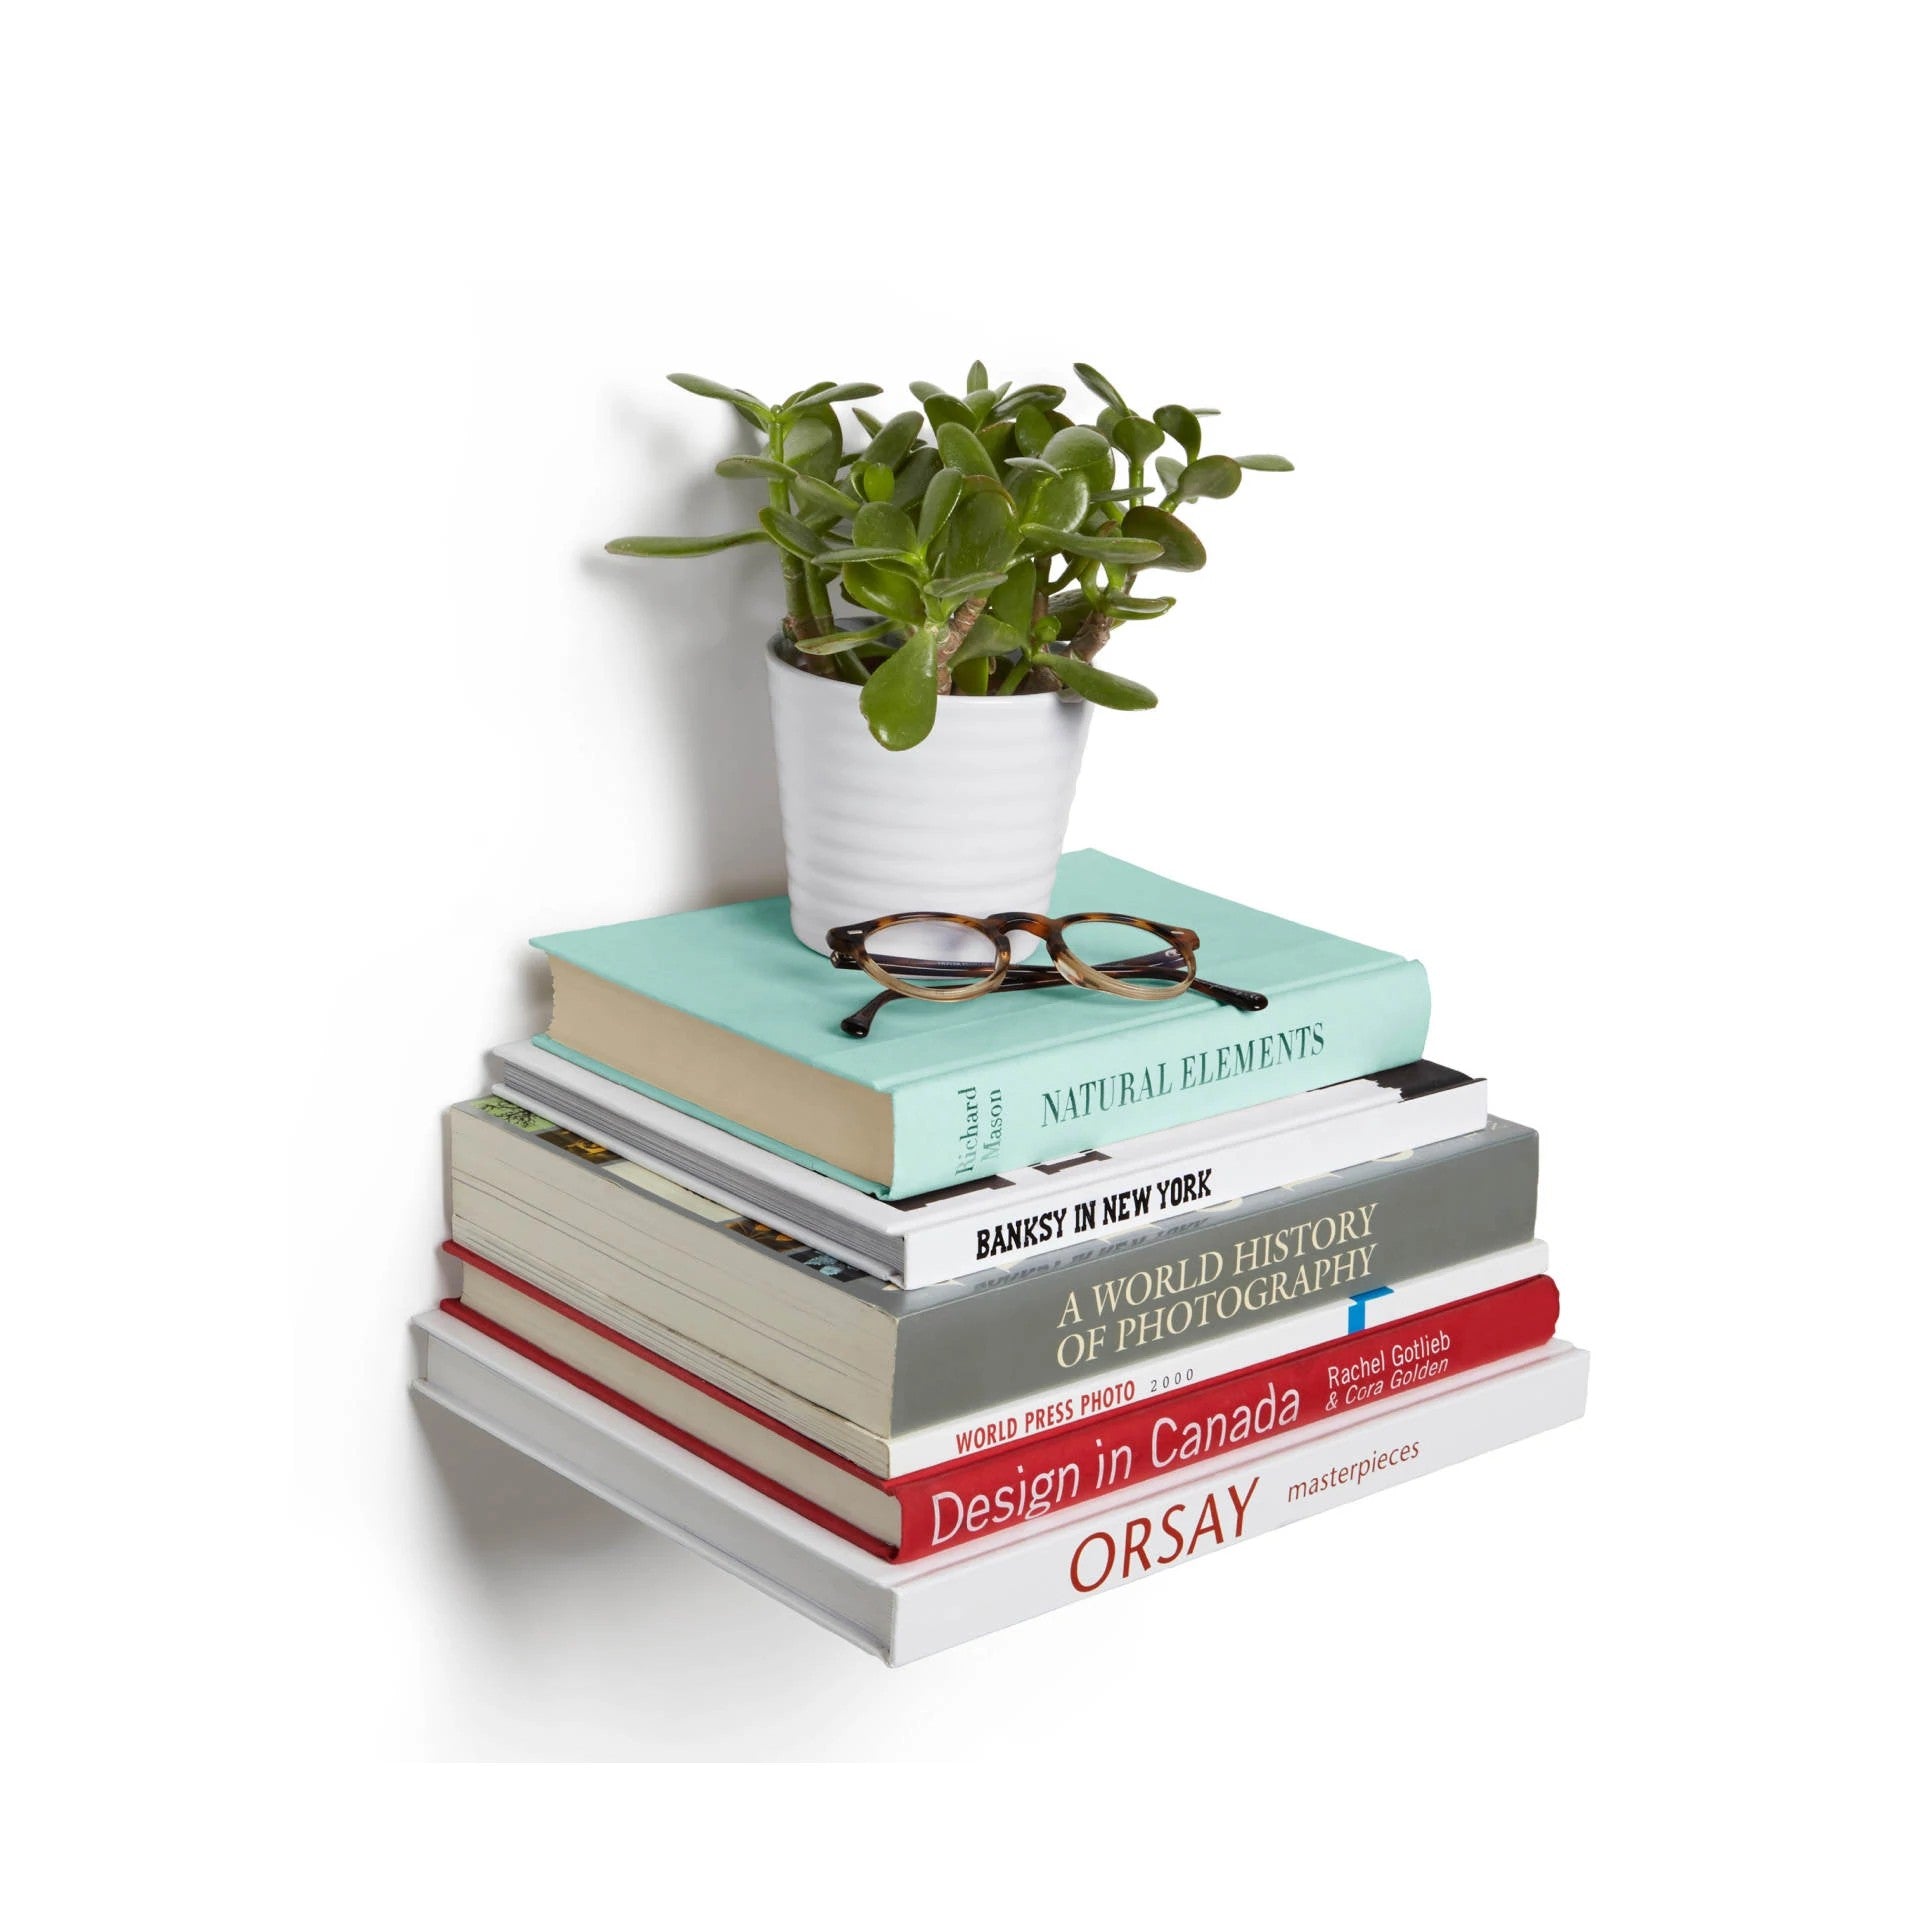 Umbra Conceal Floating Bookshelf with books, glasses, and a potted plant on it